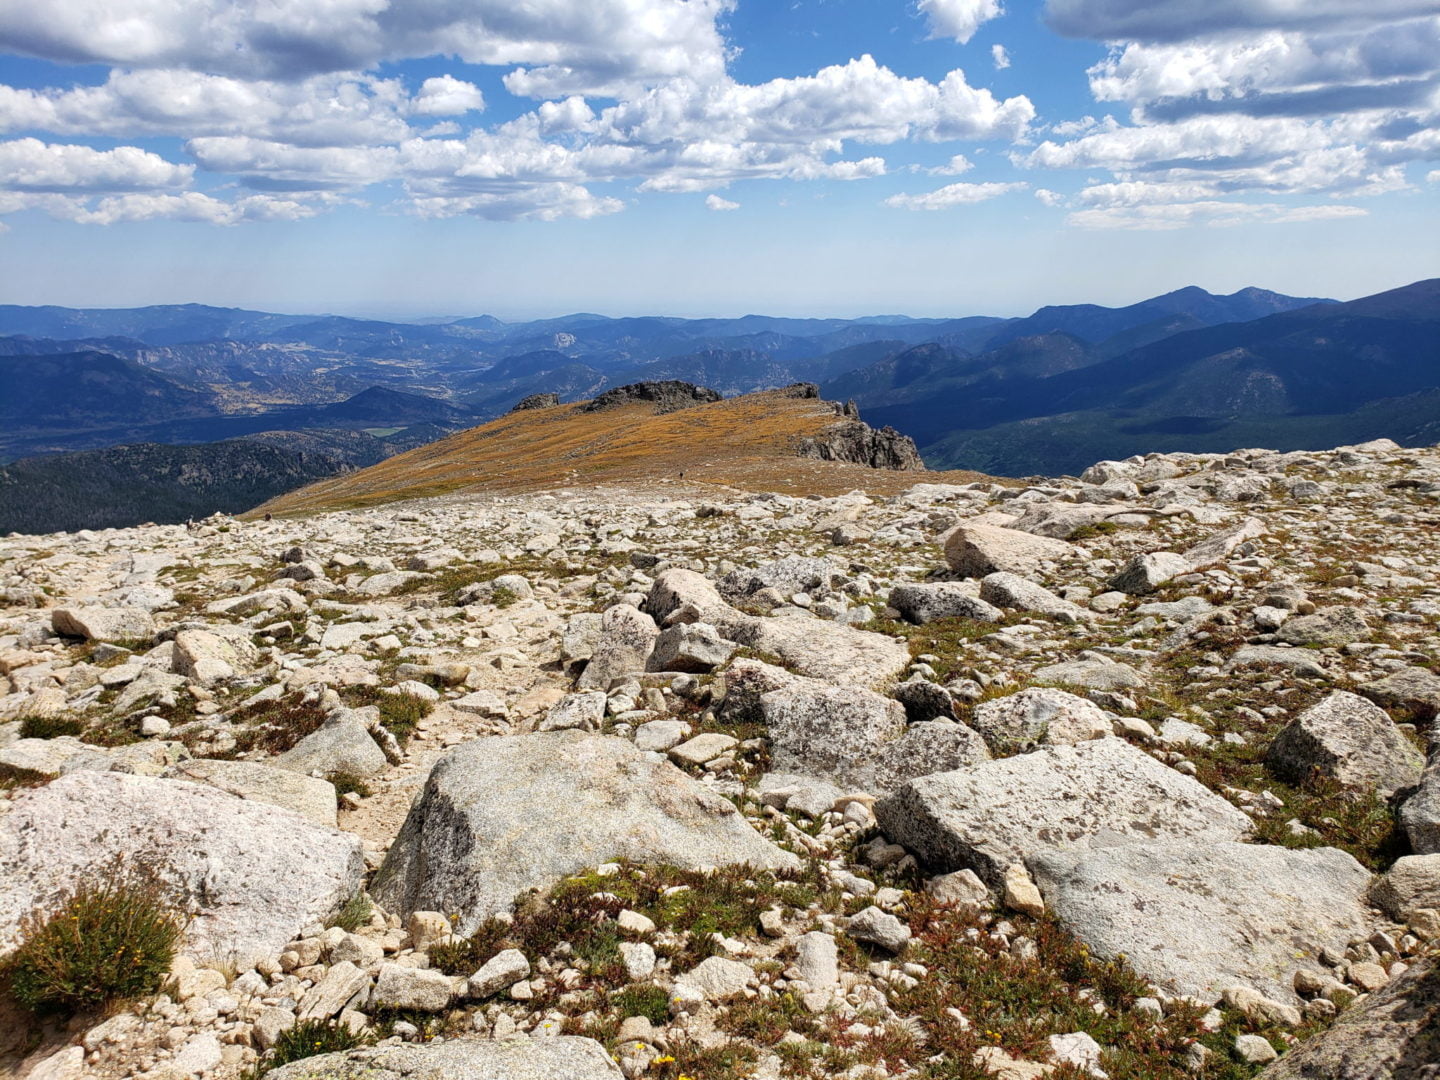 Looking east down the Flattop Mountain Trail